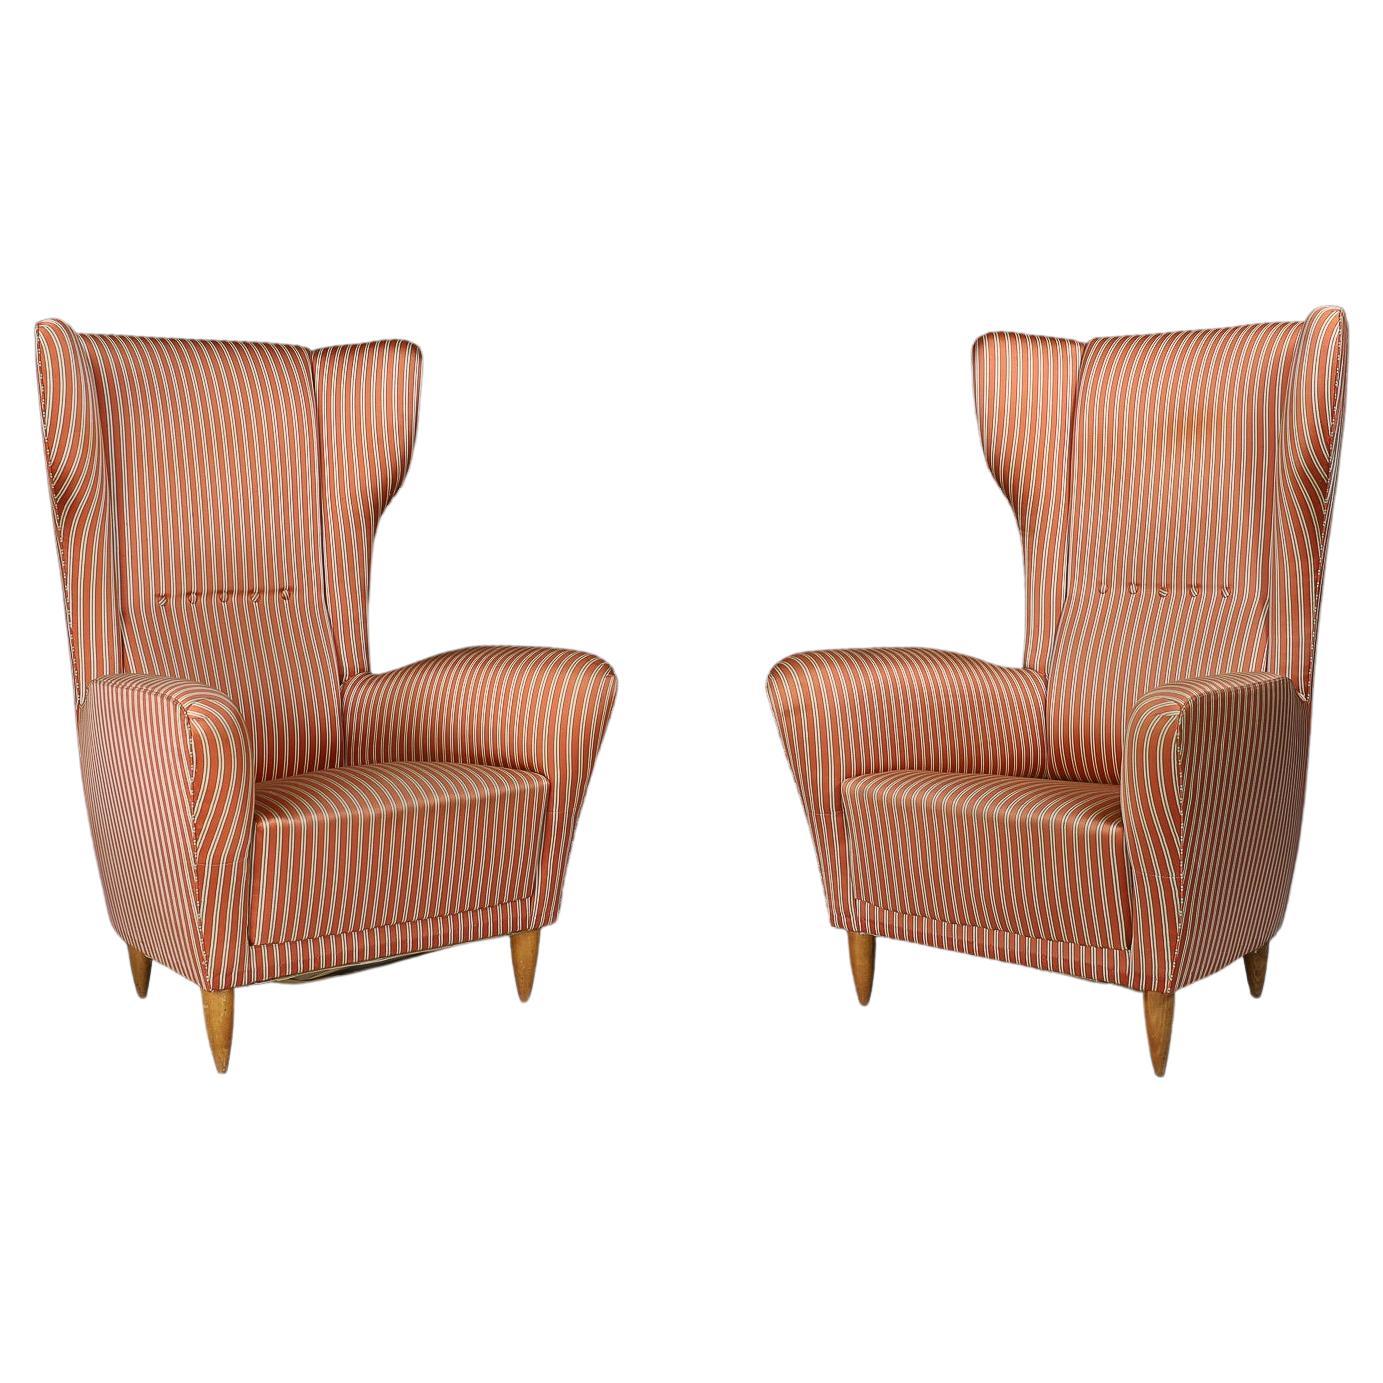 Pair of Two High Back Lounge Chairs in Original Fabric, Italy 1940s For Sale